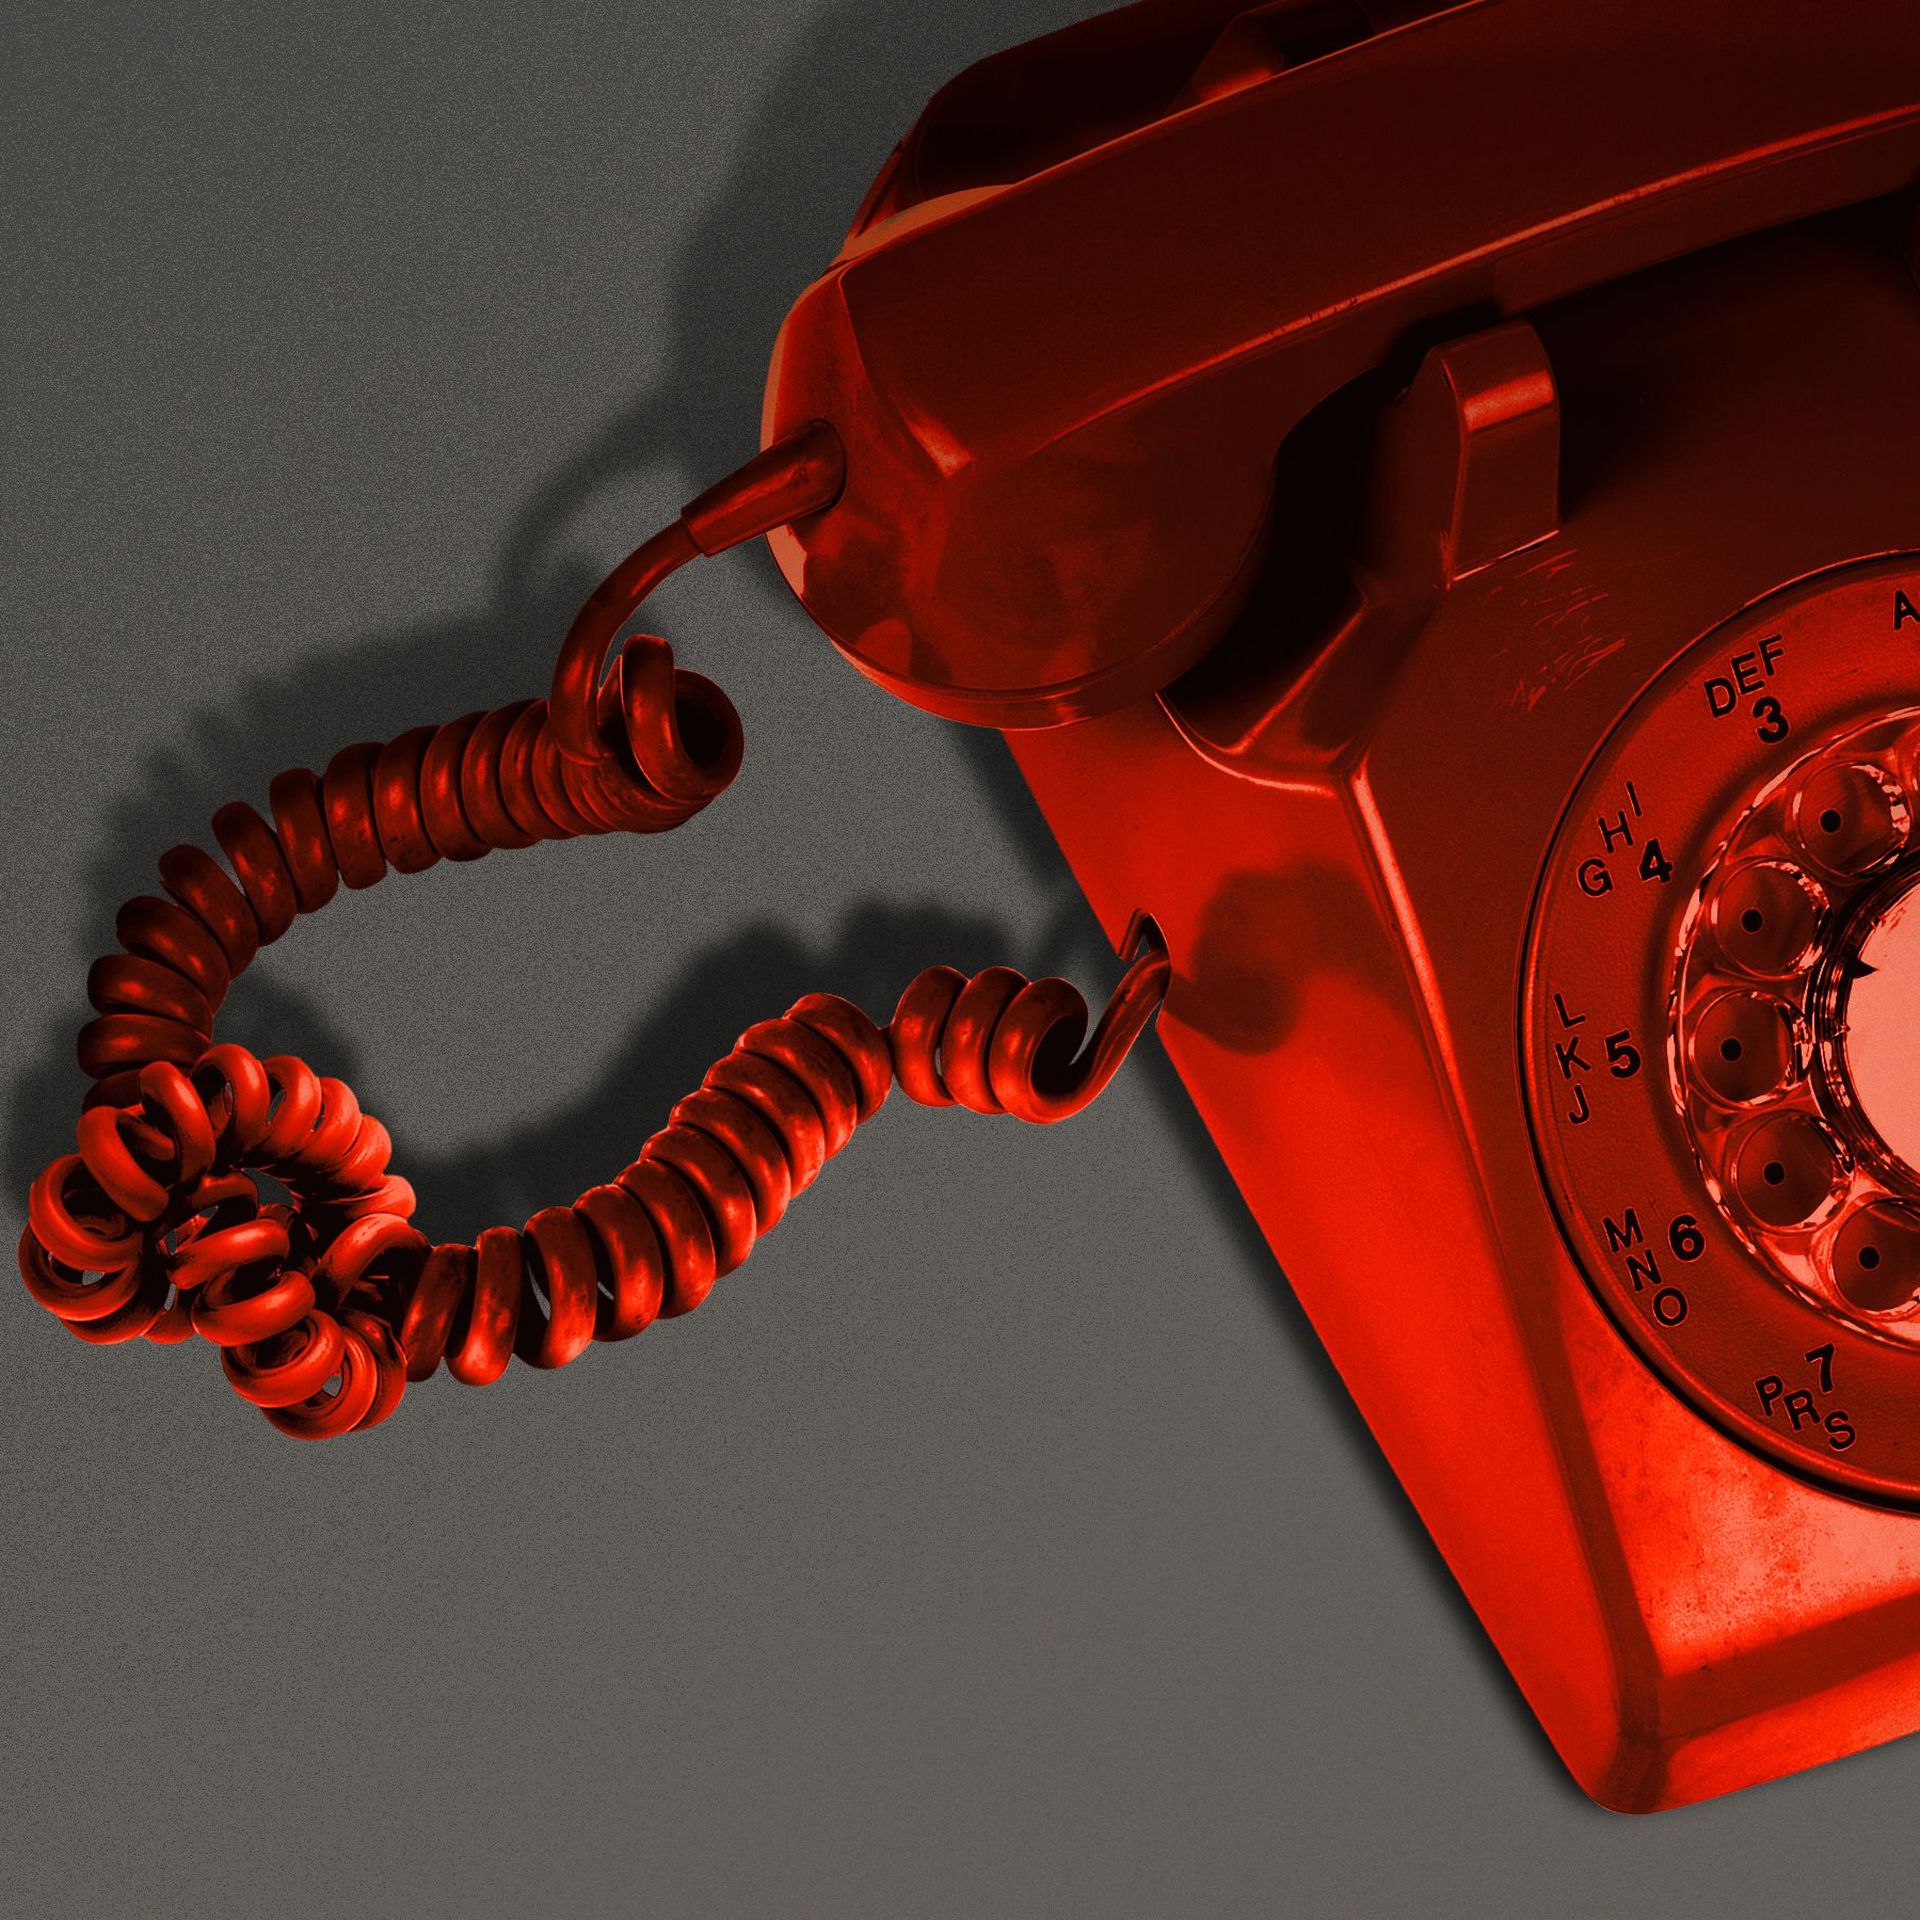 Illustration of a rotary phone with a knot in the wire.